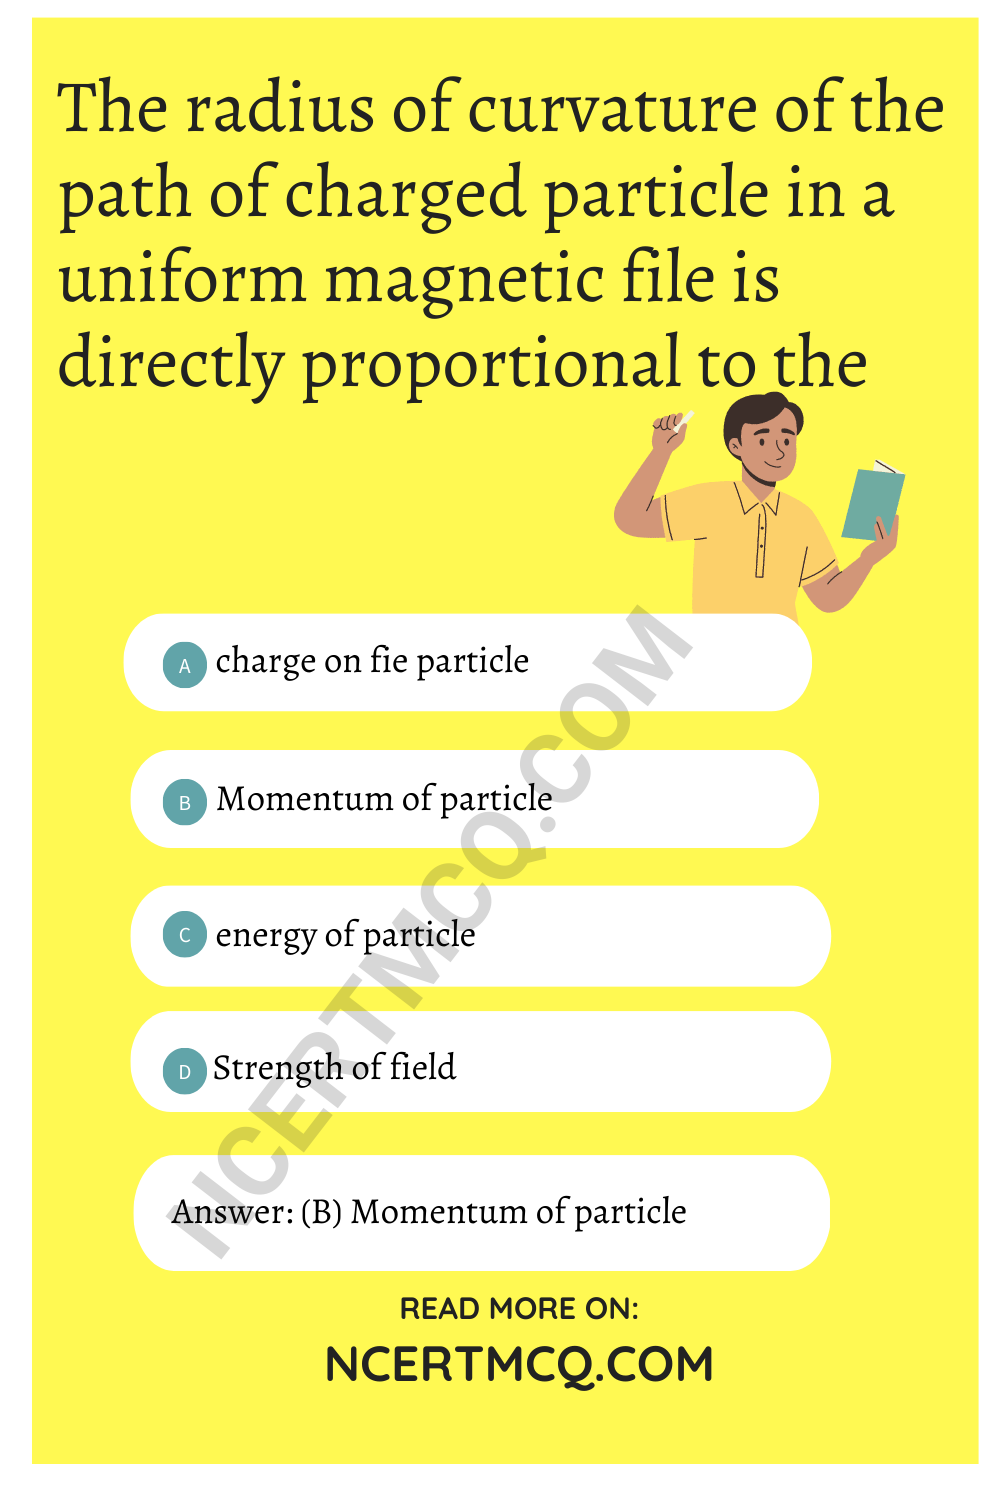 The radius of curvature of the path of charged particle in a uniform magnetic file is directly proportional to the